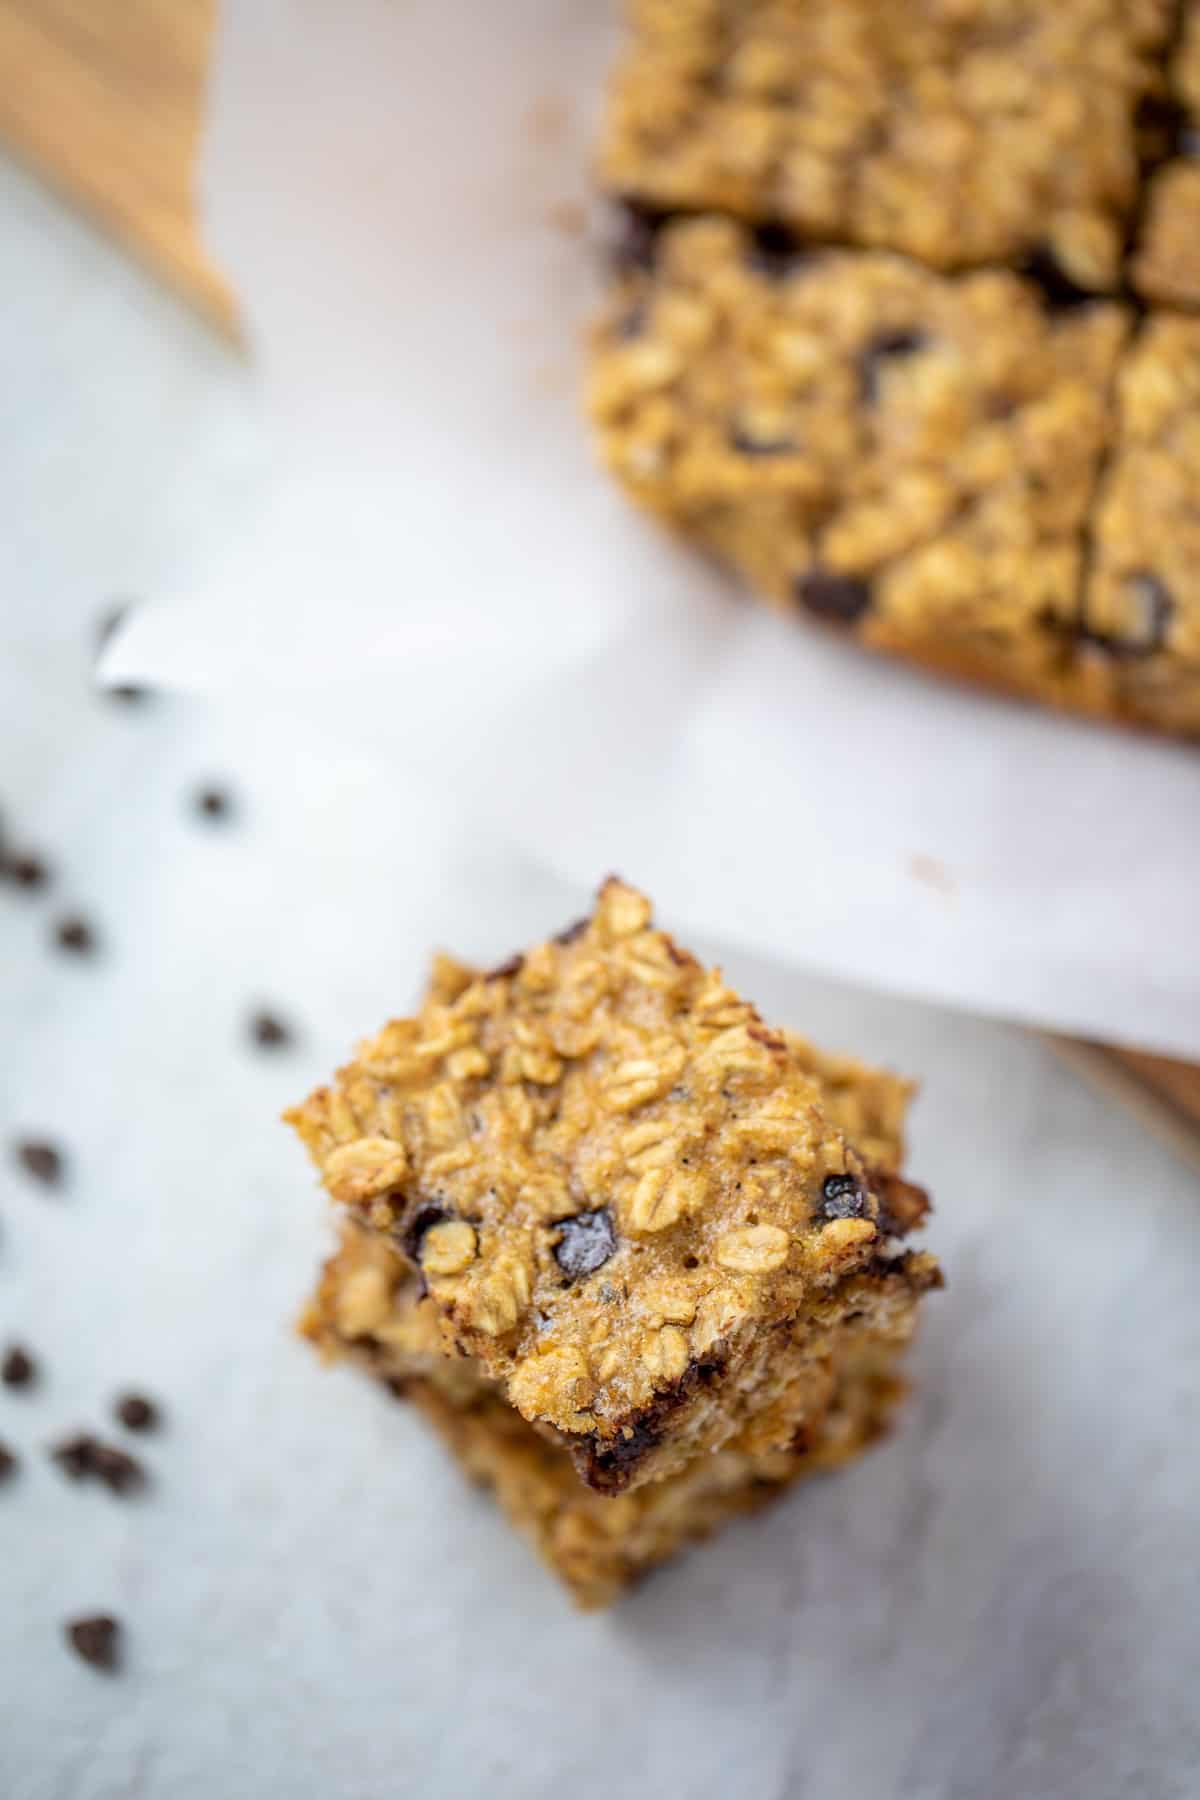 Chocolate Chip Oatmeal Bars cut into bars and stacked on top of eachother.